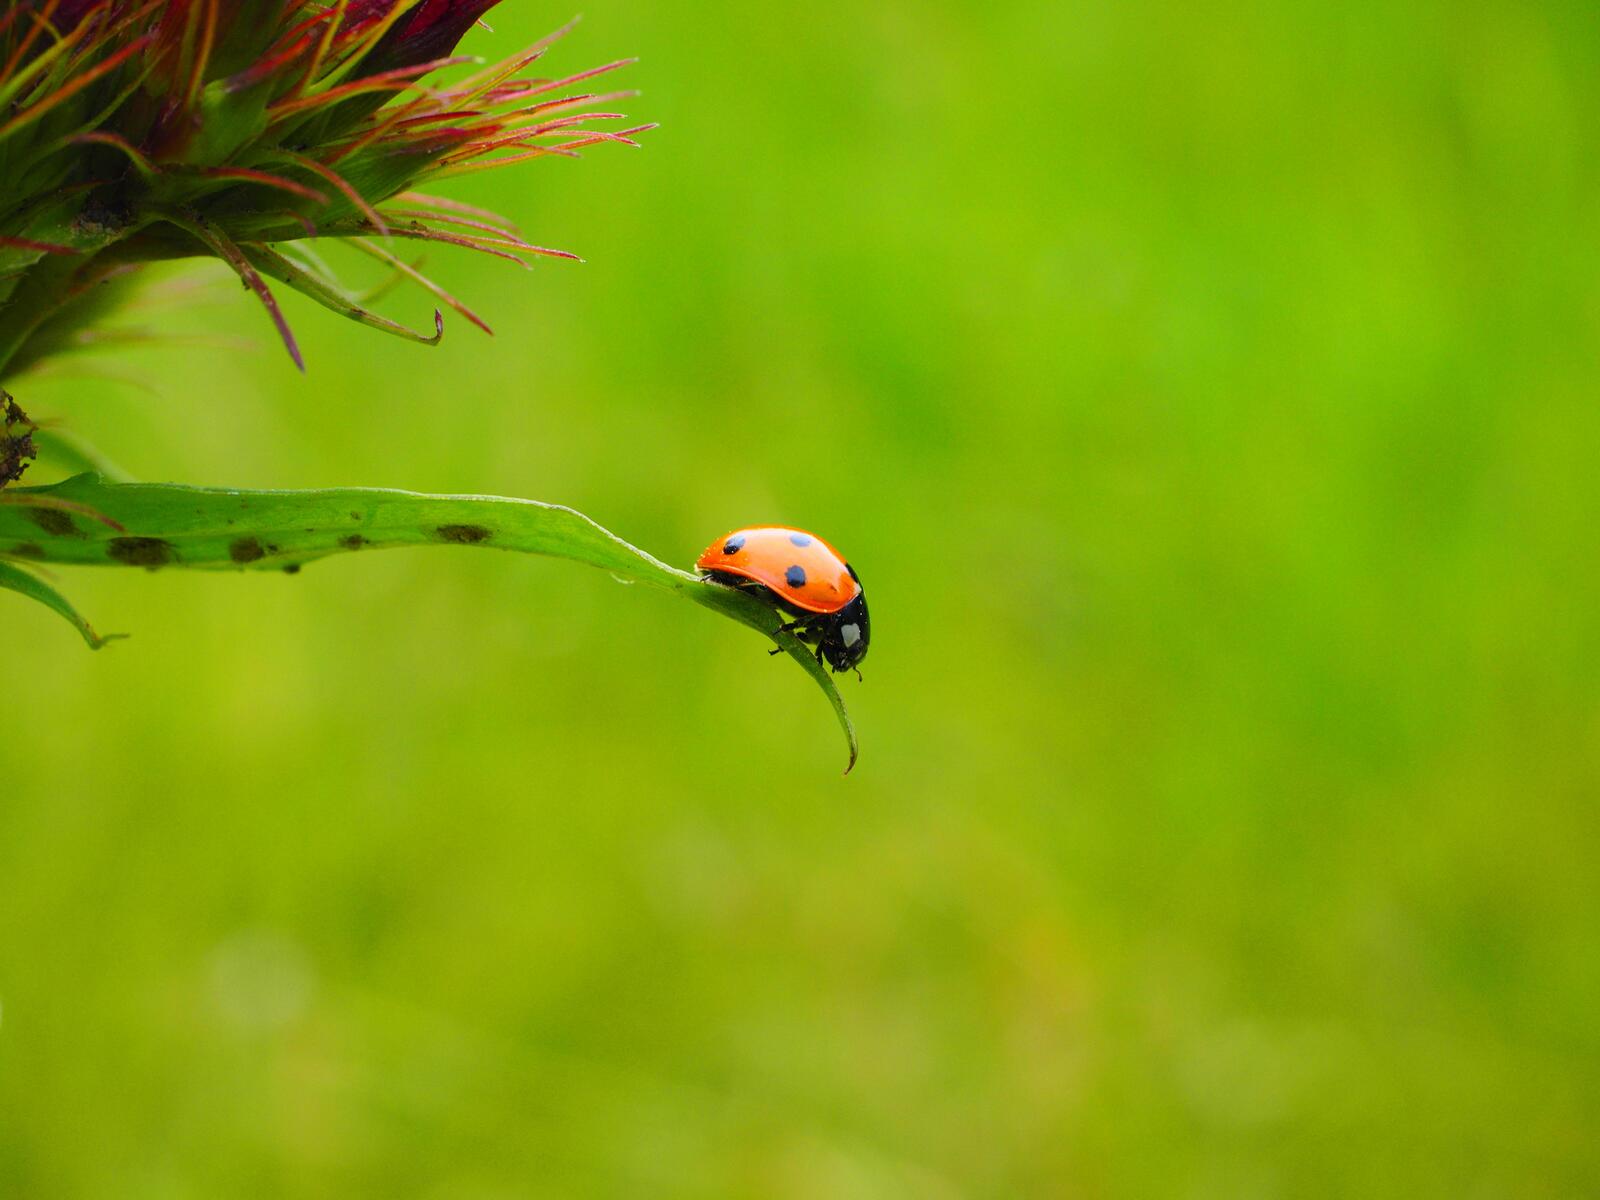 Free photo A ladybug is coming down a blade of grass.